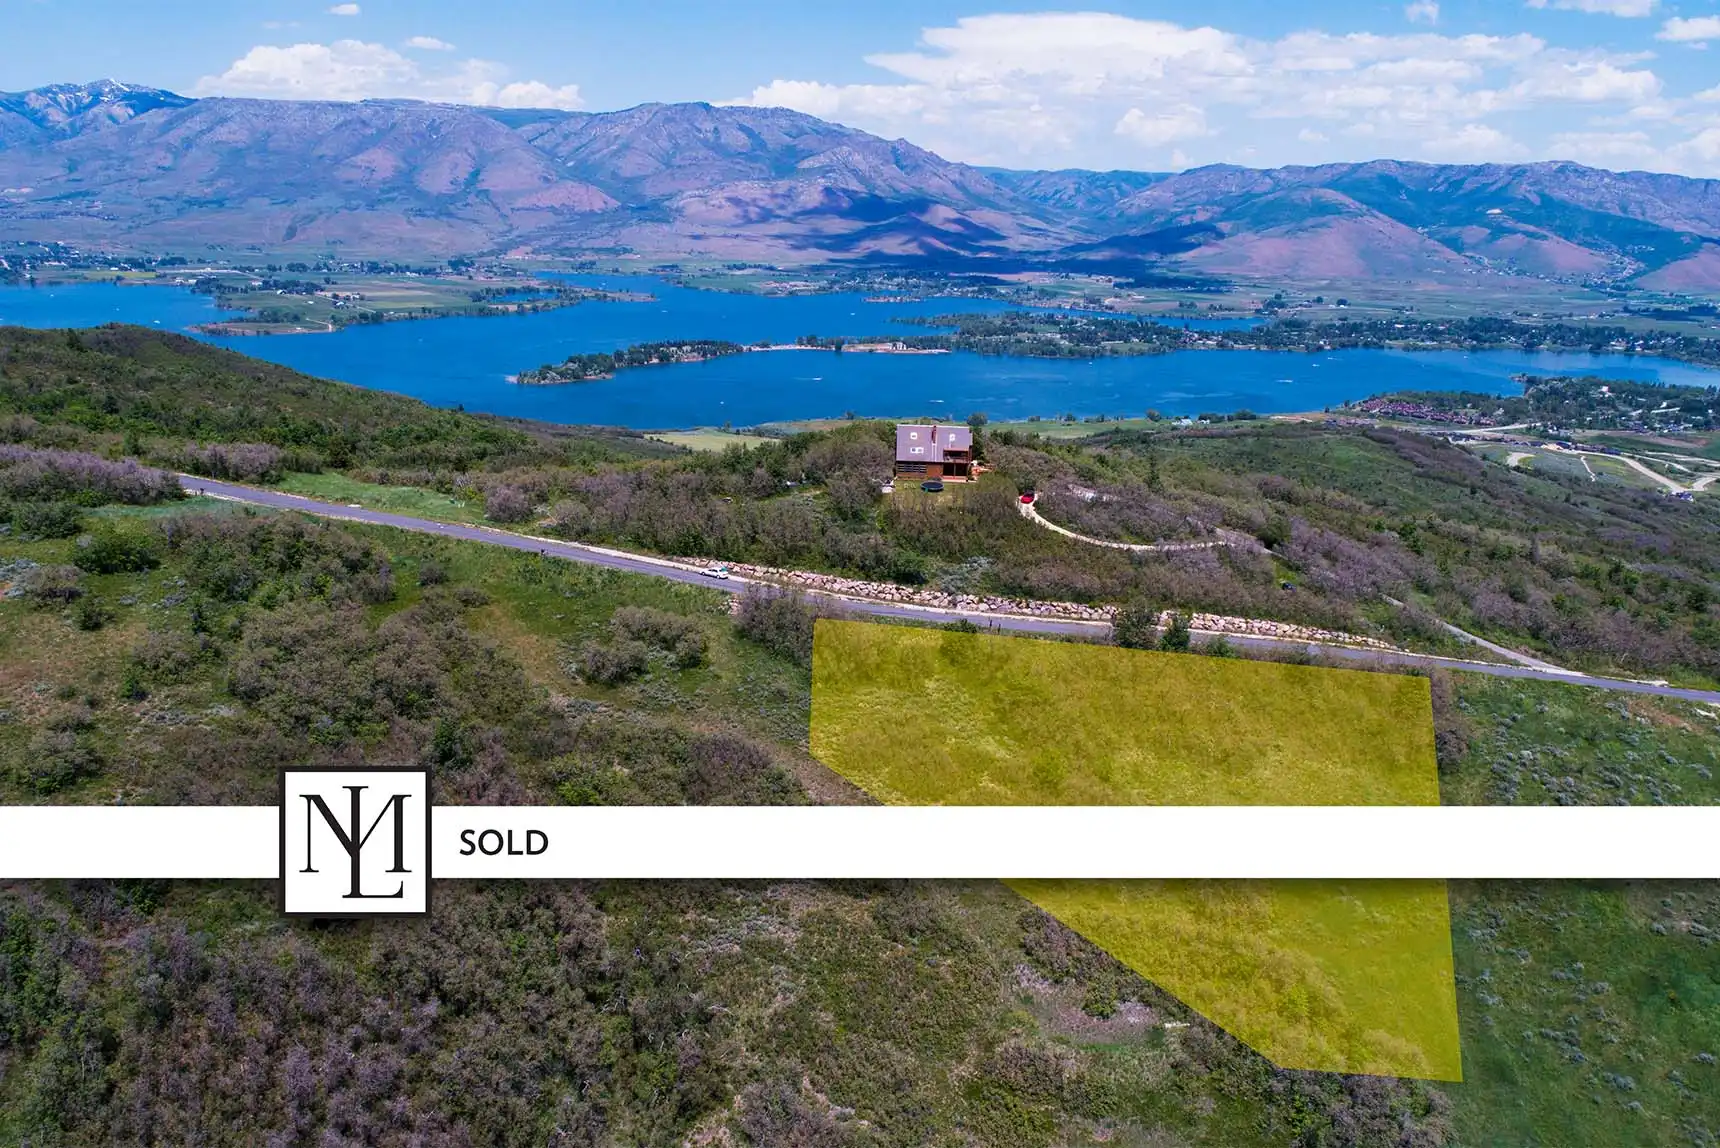 hero image for blog ** SOLD ** Gorgeous Lot For Sale at 1533 Basinview Rd. Huntsville, UT